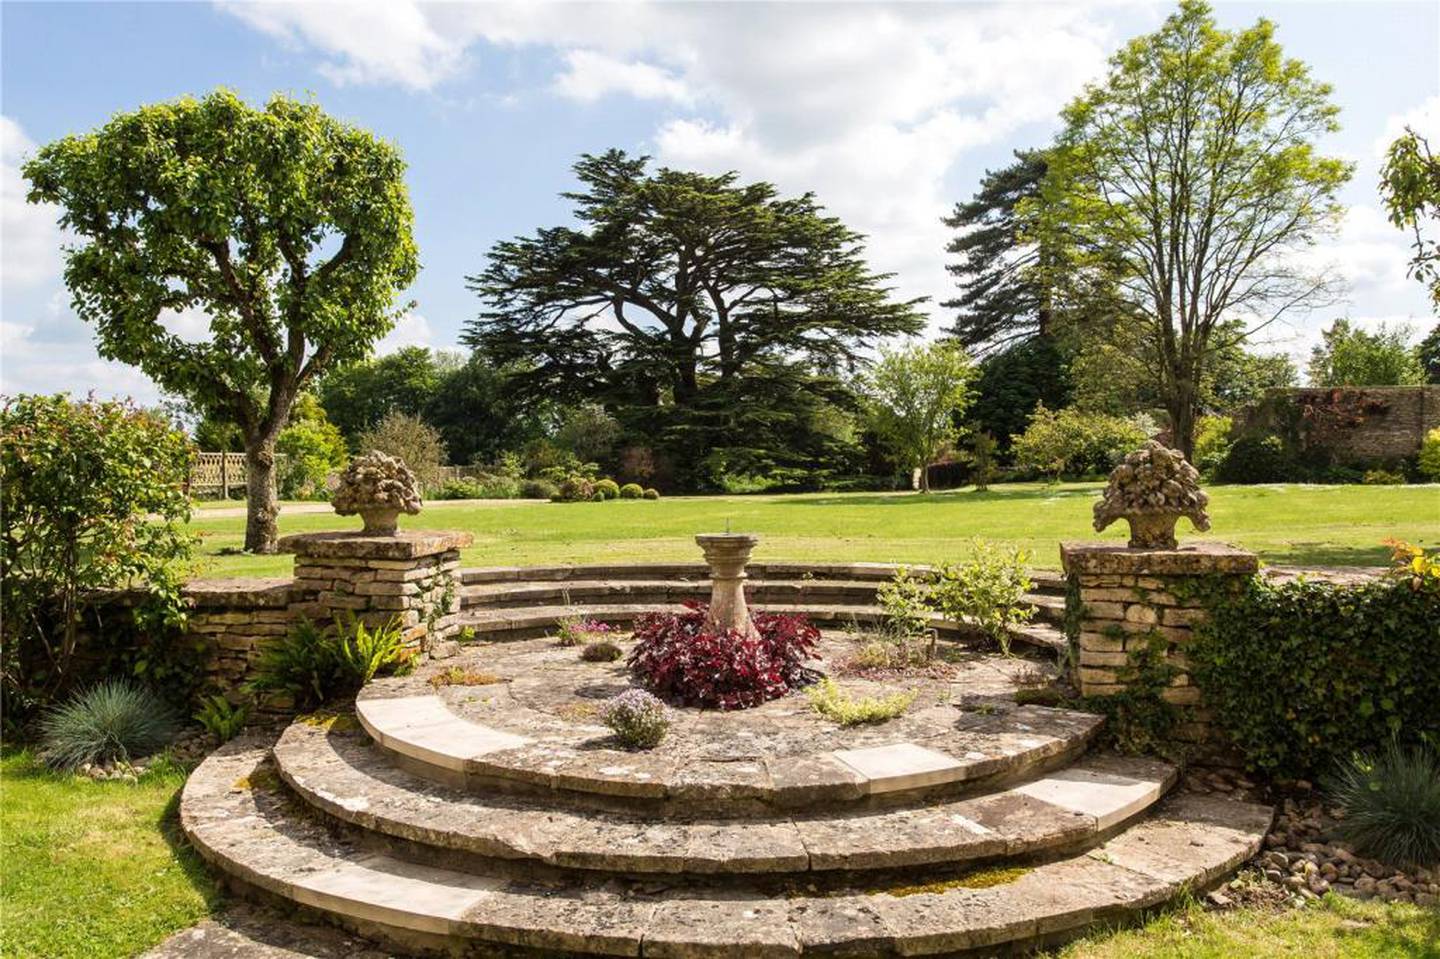 The gardens at Luckington Court, which features a 400-year-old Lebanese cedar tree. Photo: Woolley & Wallis